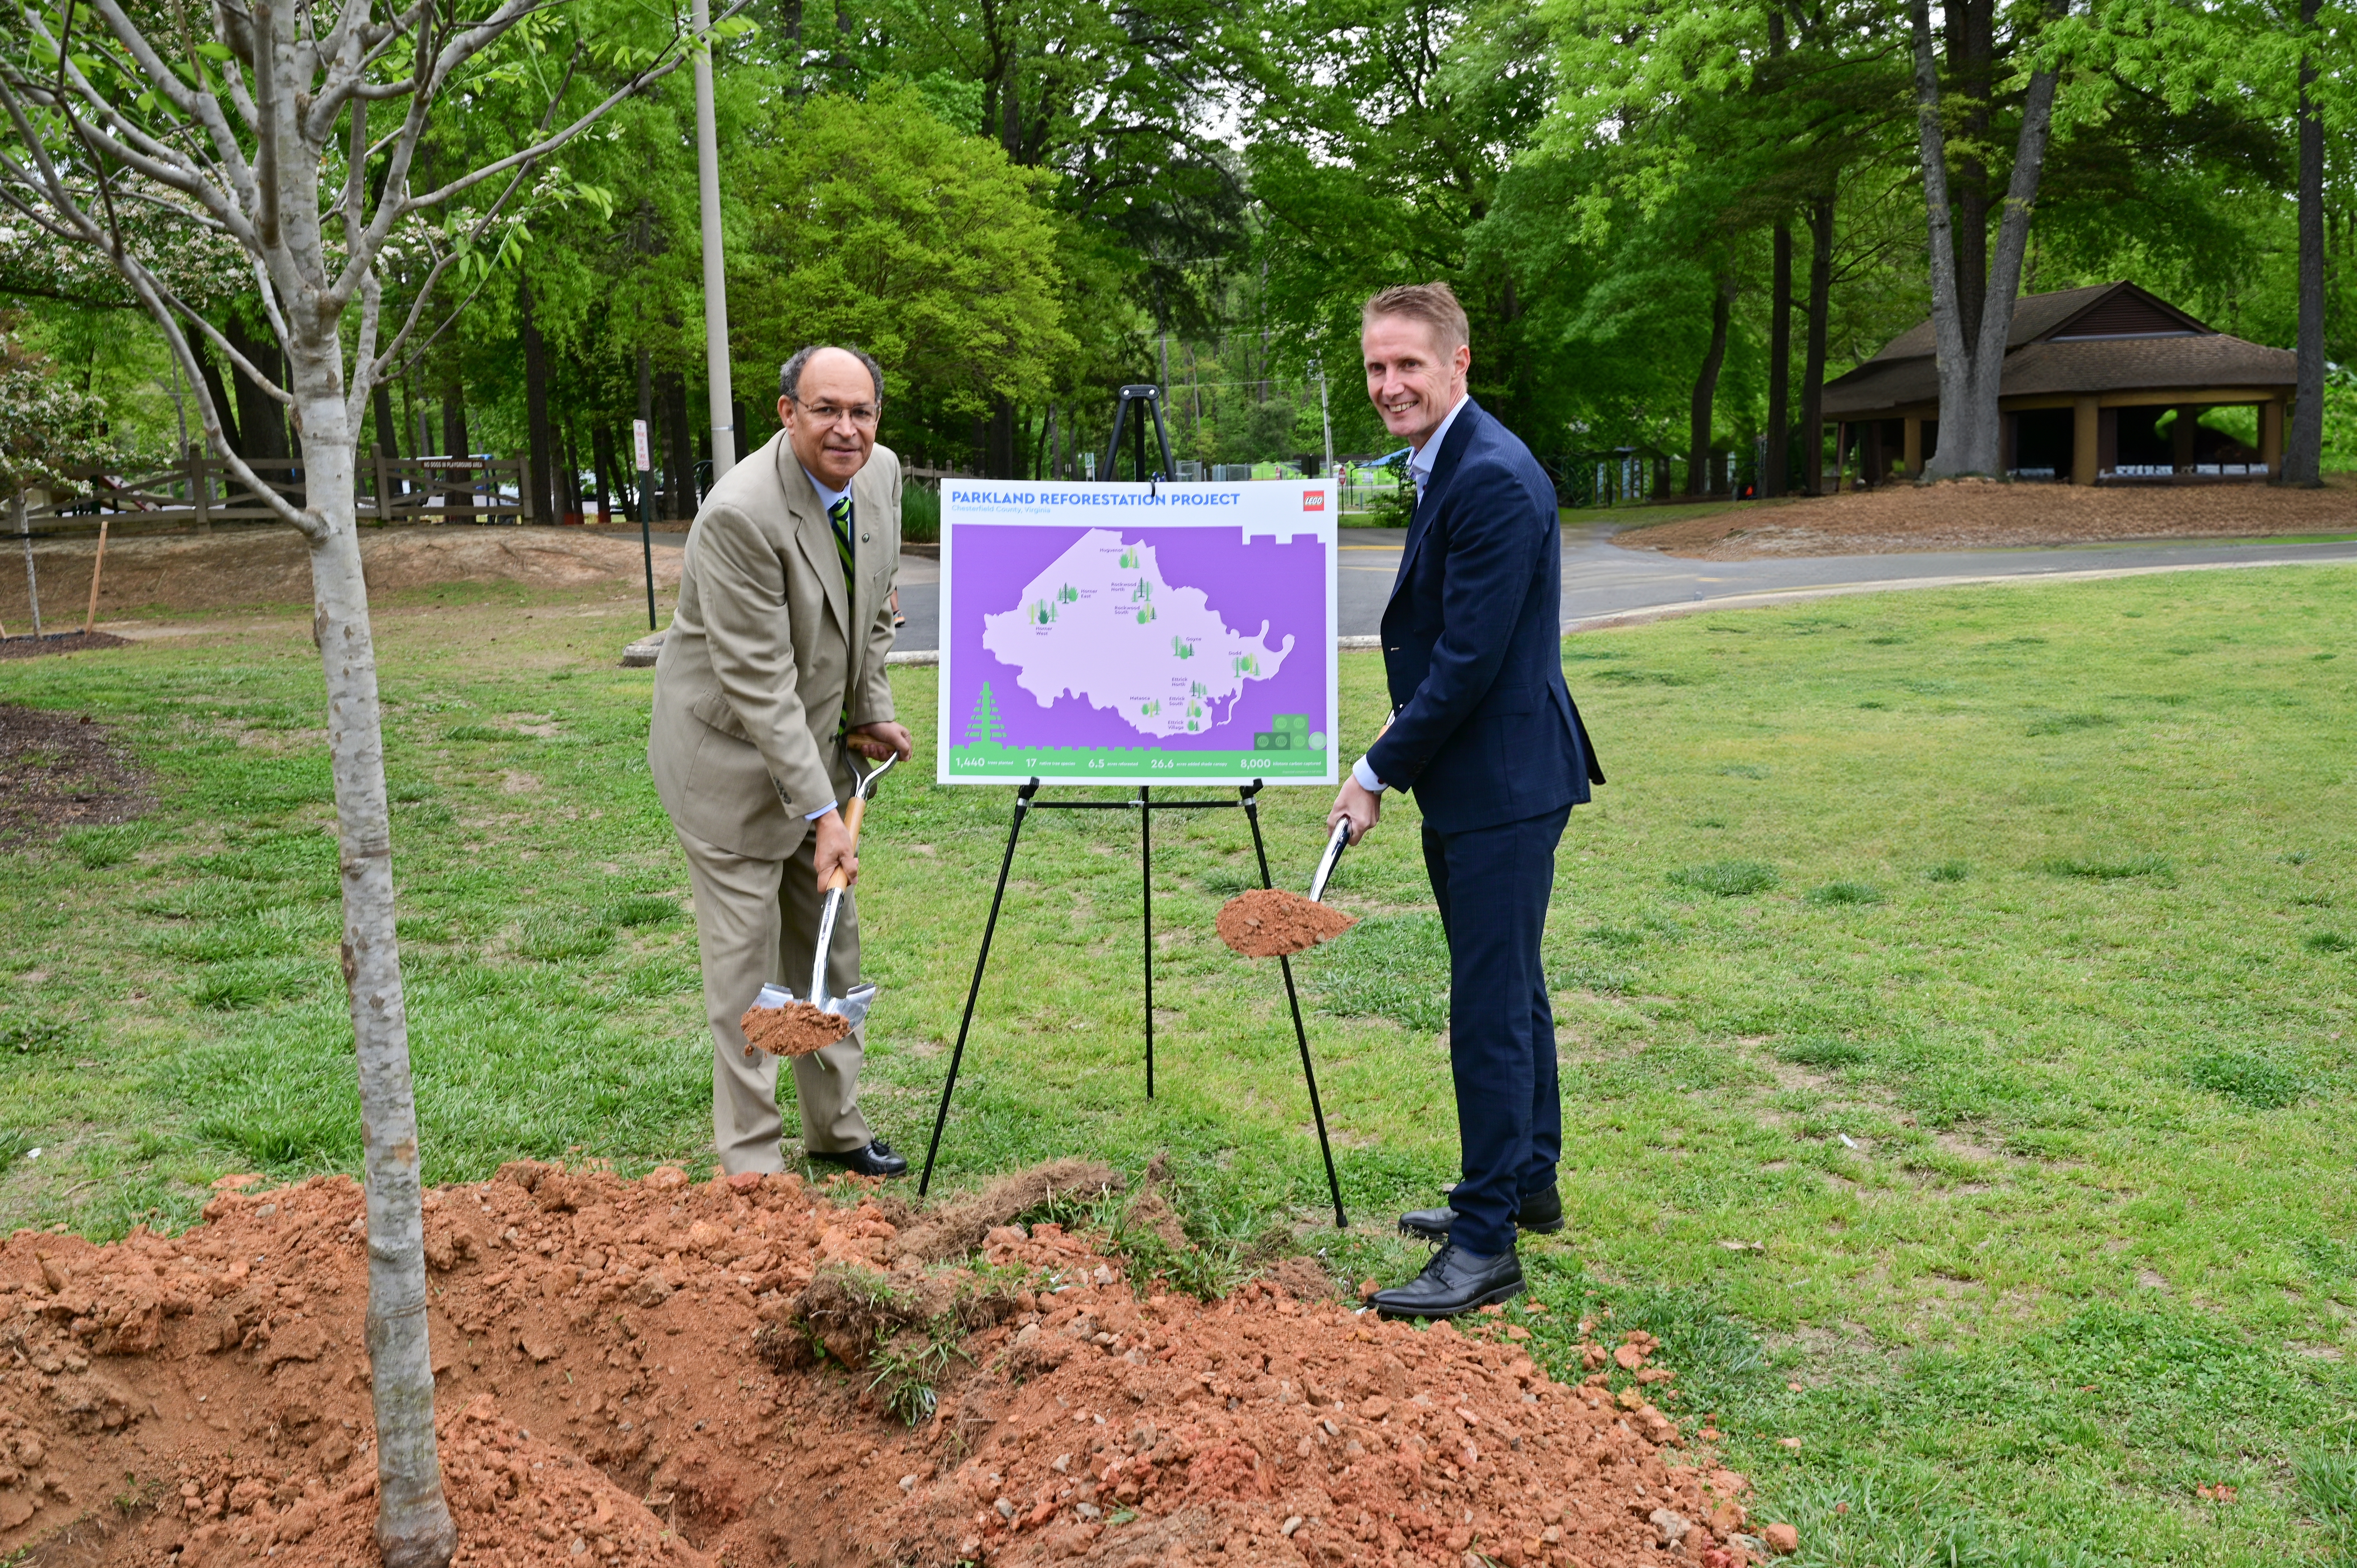 The LEGO Group’s Preben Elnef and James M. “Jim” Holland, Chair, Chesterfield County Board of Supervisors, plant a tree in Rockwood Park as a ceremonial marker of the public-private reforestation program.